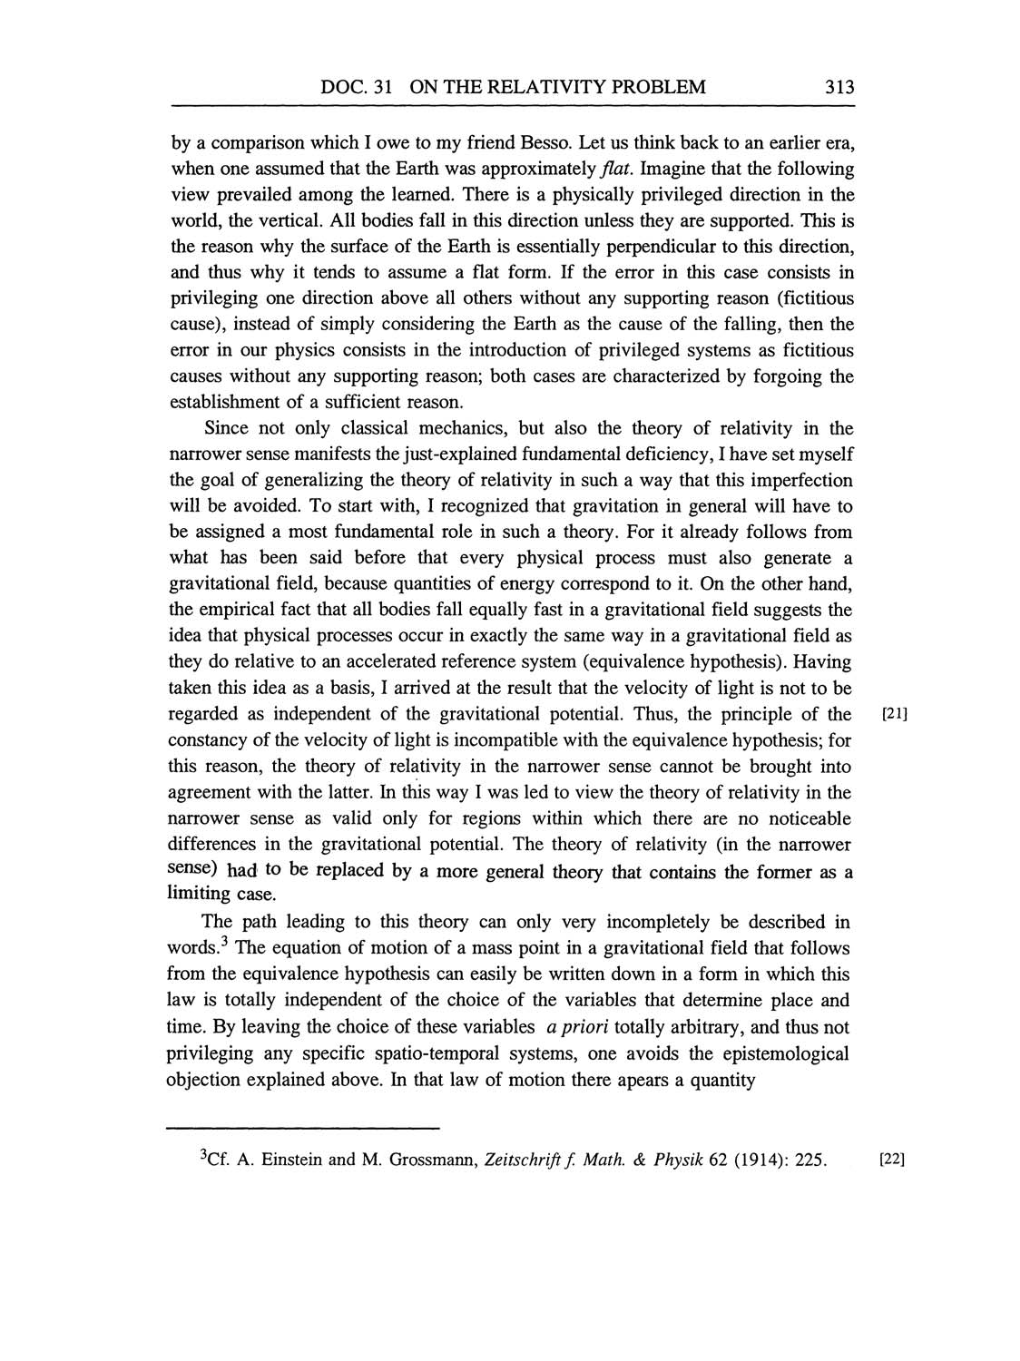 Volume 4: The Swiss Years: Writings 1912-1914 (English translation supplement) page 313